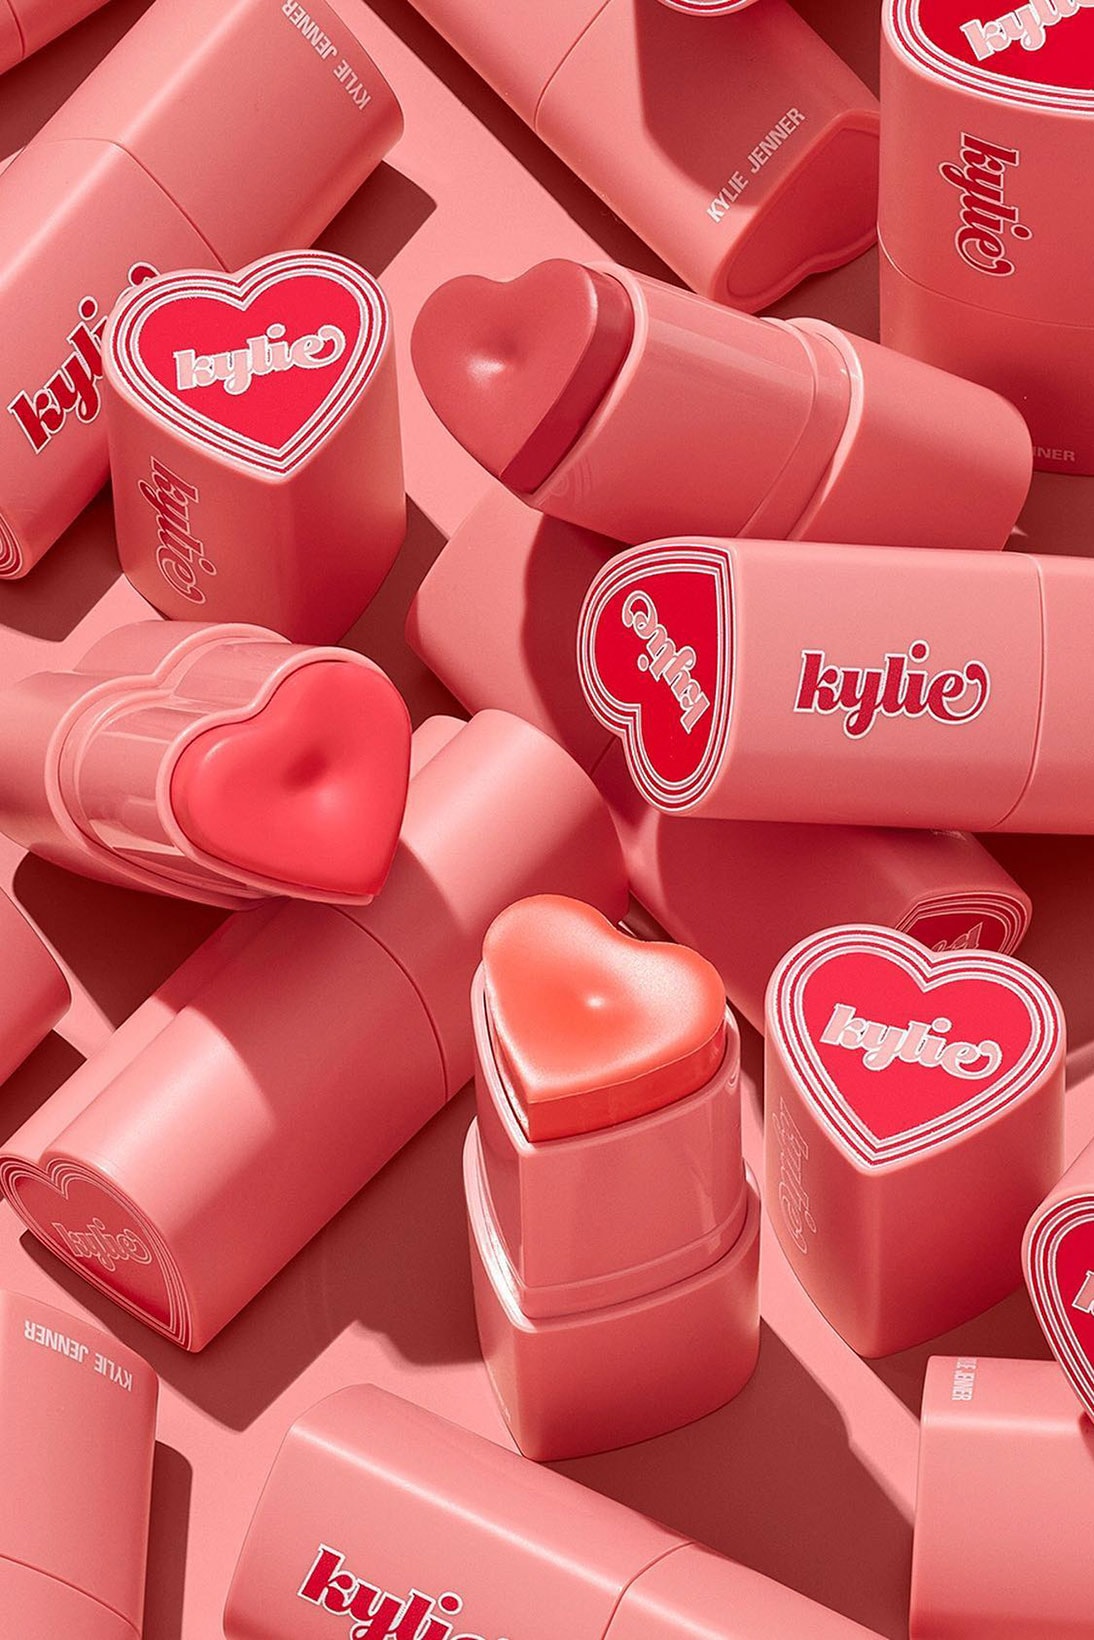 Kylie Jenner Cosmetics Valentines Day Collection Makeup Lipsticks